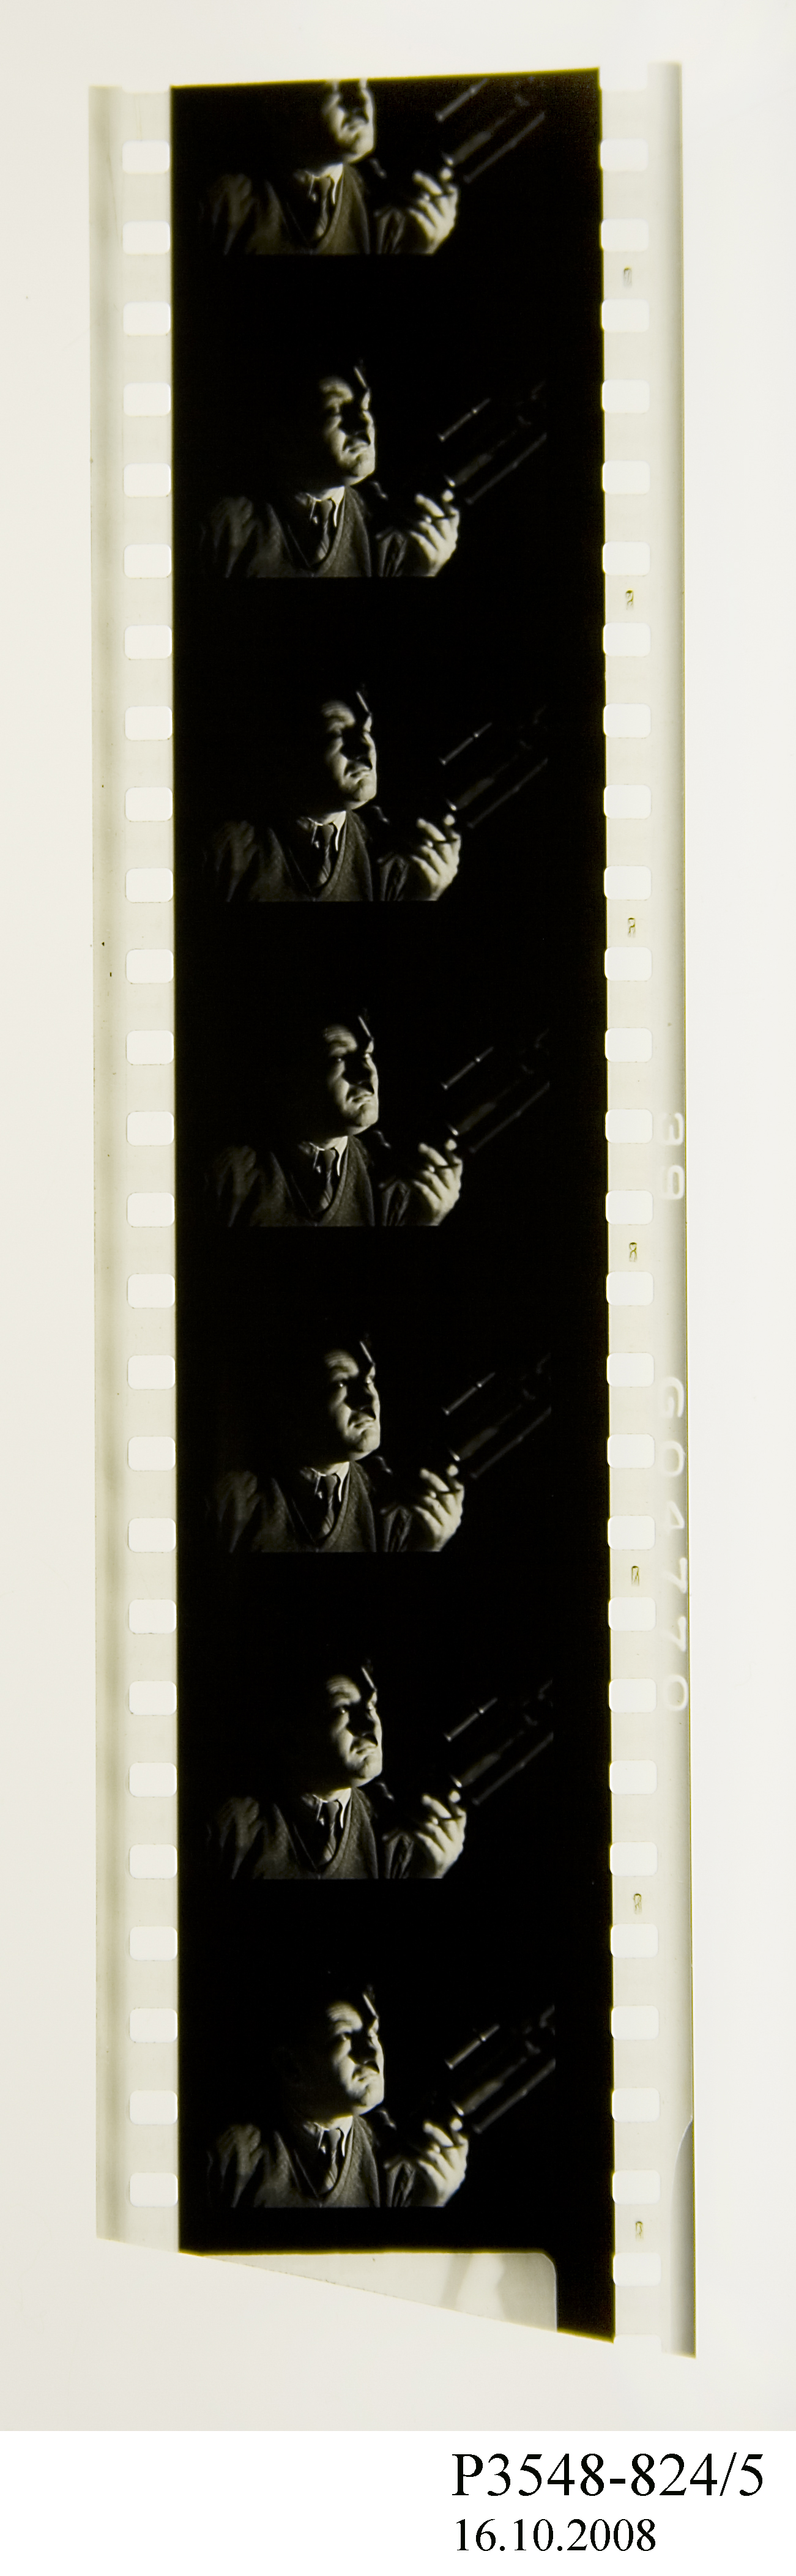 Film strip showing a man looking into a telescope